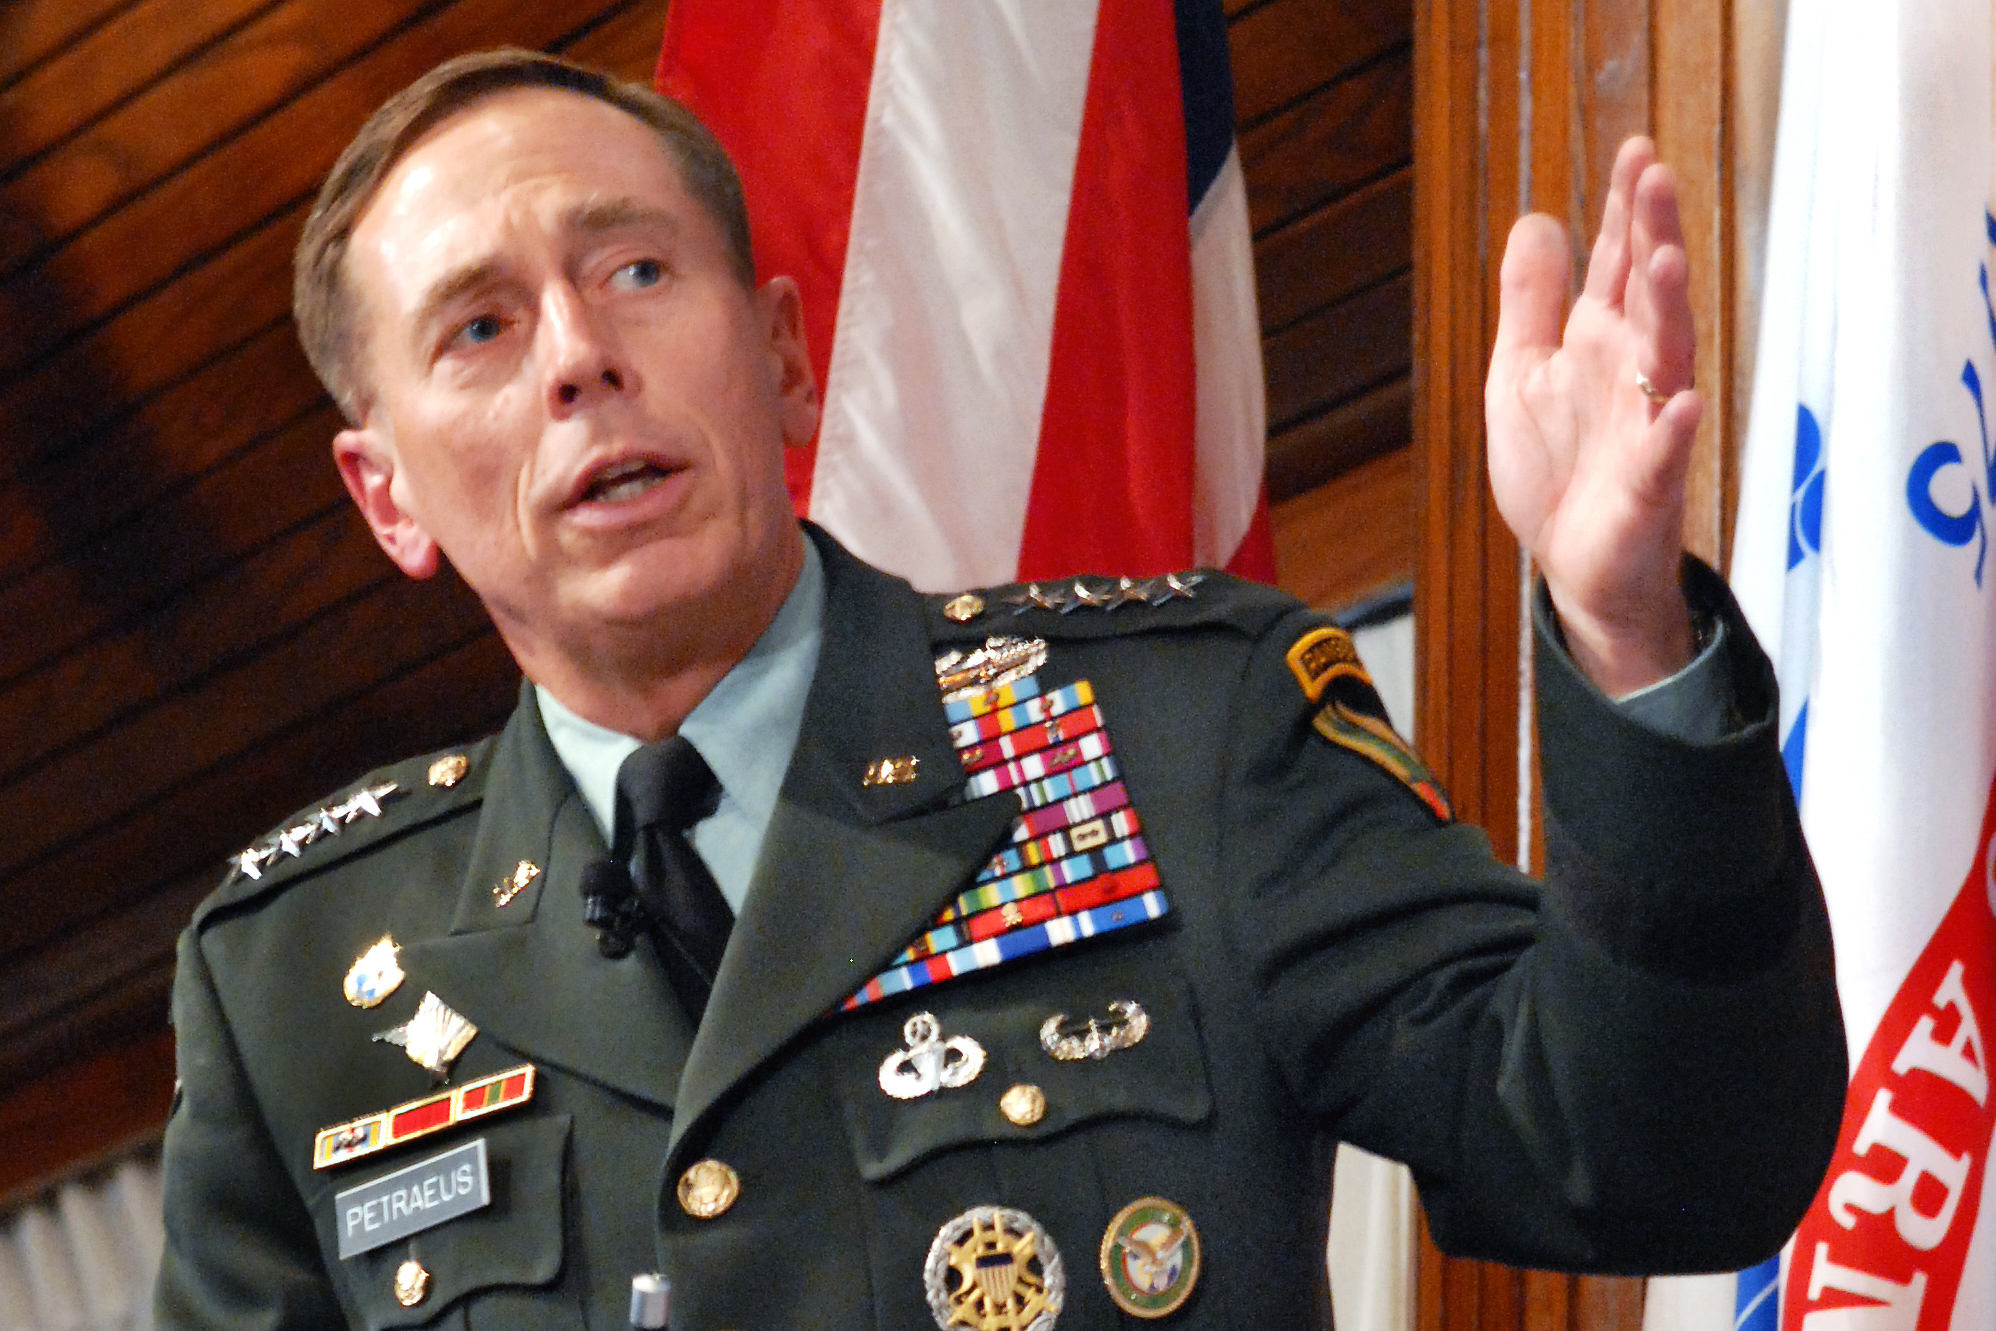 PHOTO: U.S. Army Gen. David H. Petraeus, then commander of U.S. Central Command, speaking at a leadership and counterinsurgency symposium in Washington, Sept. 23, 2009.